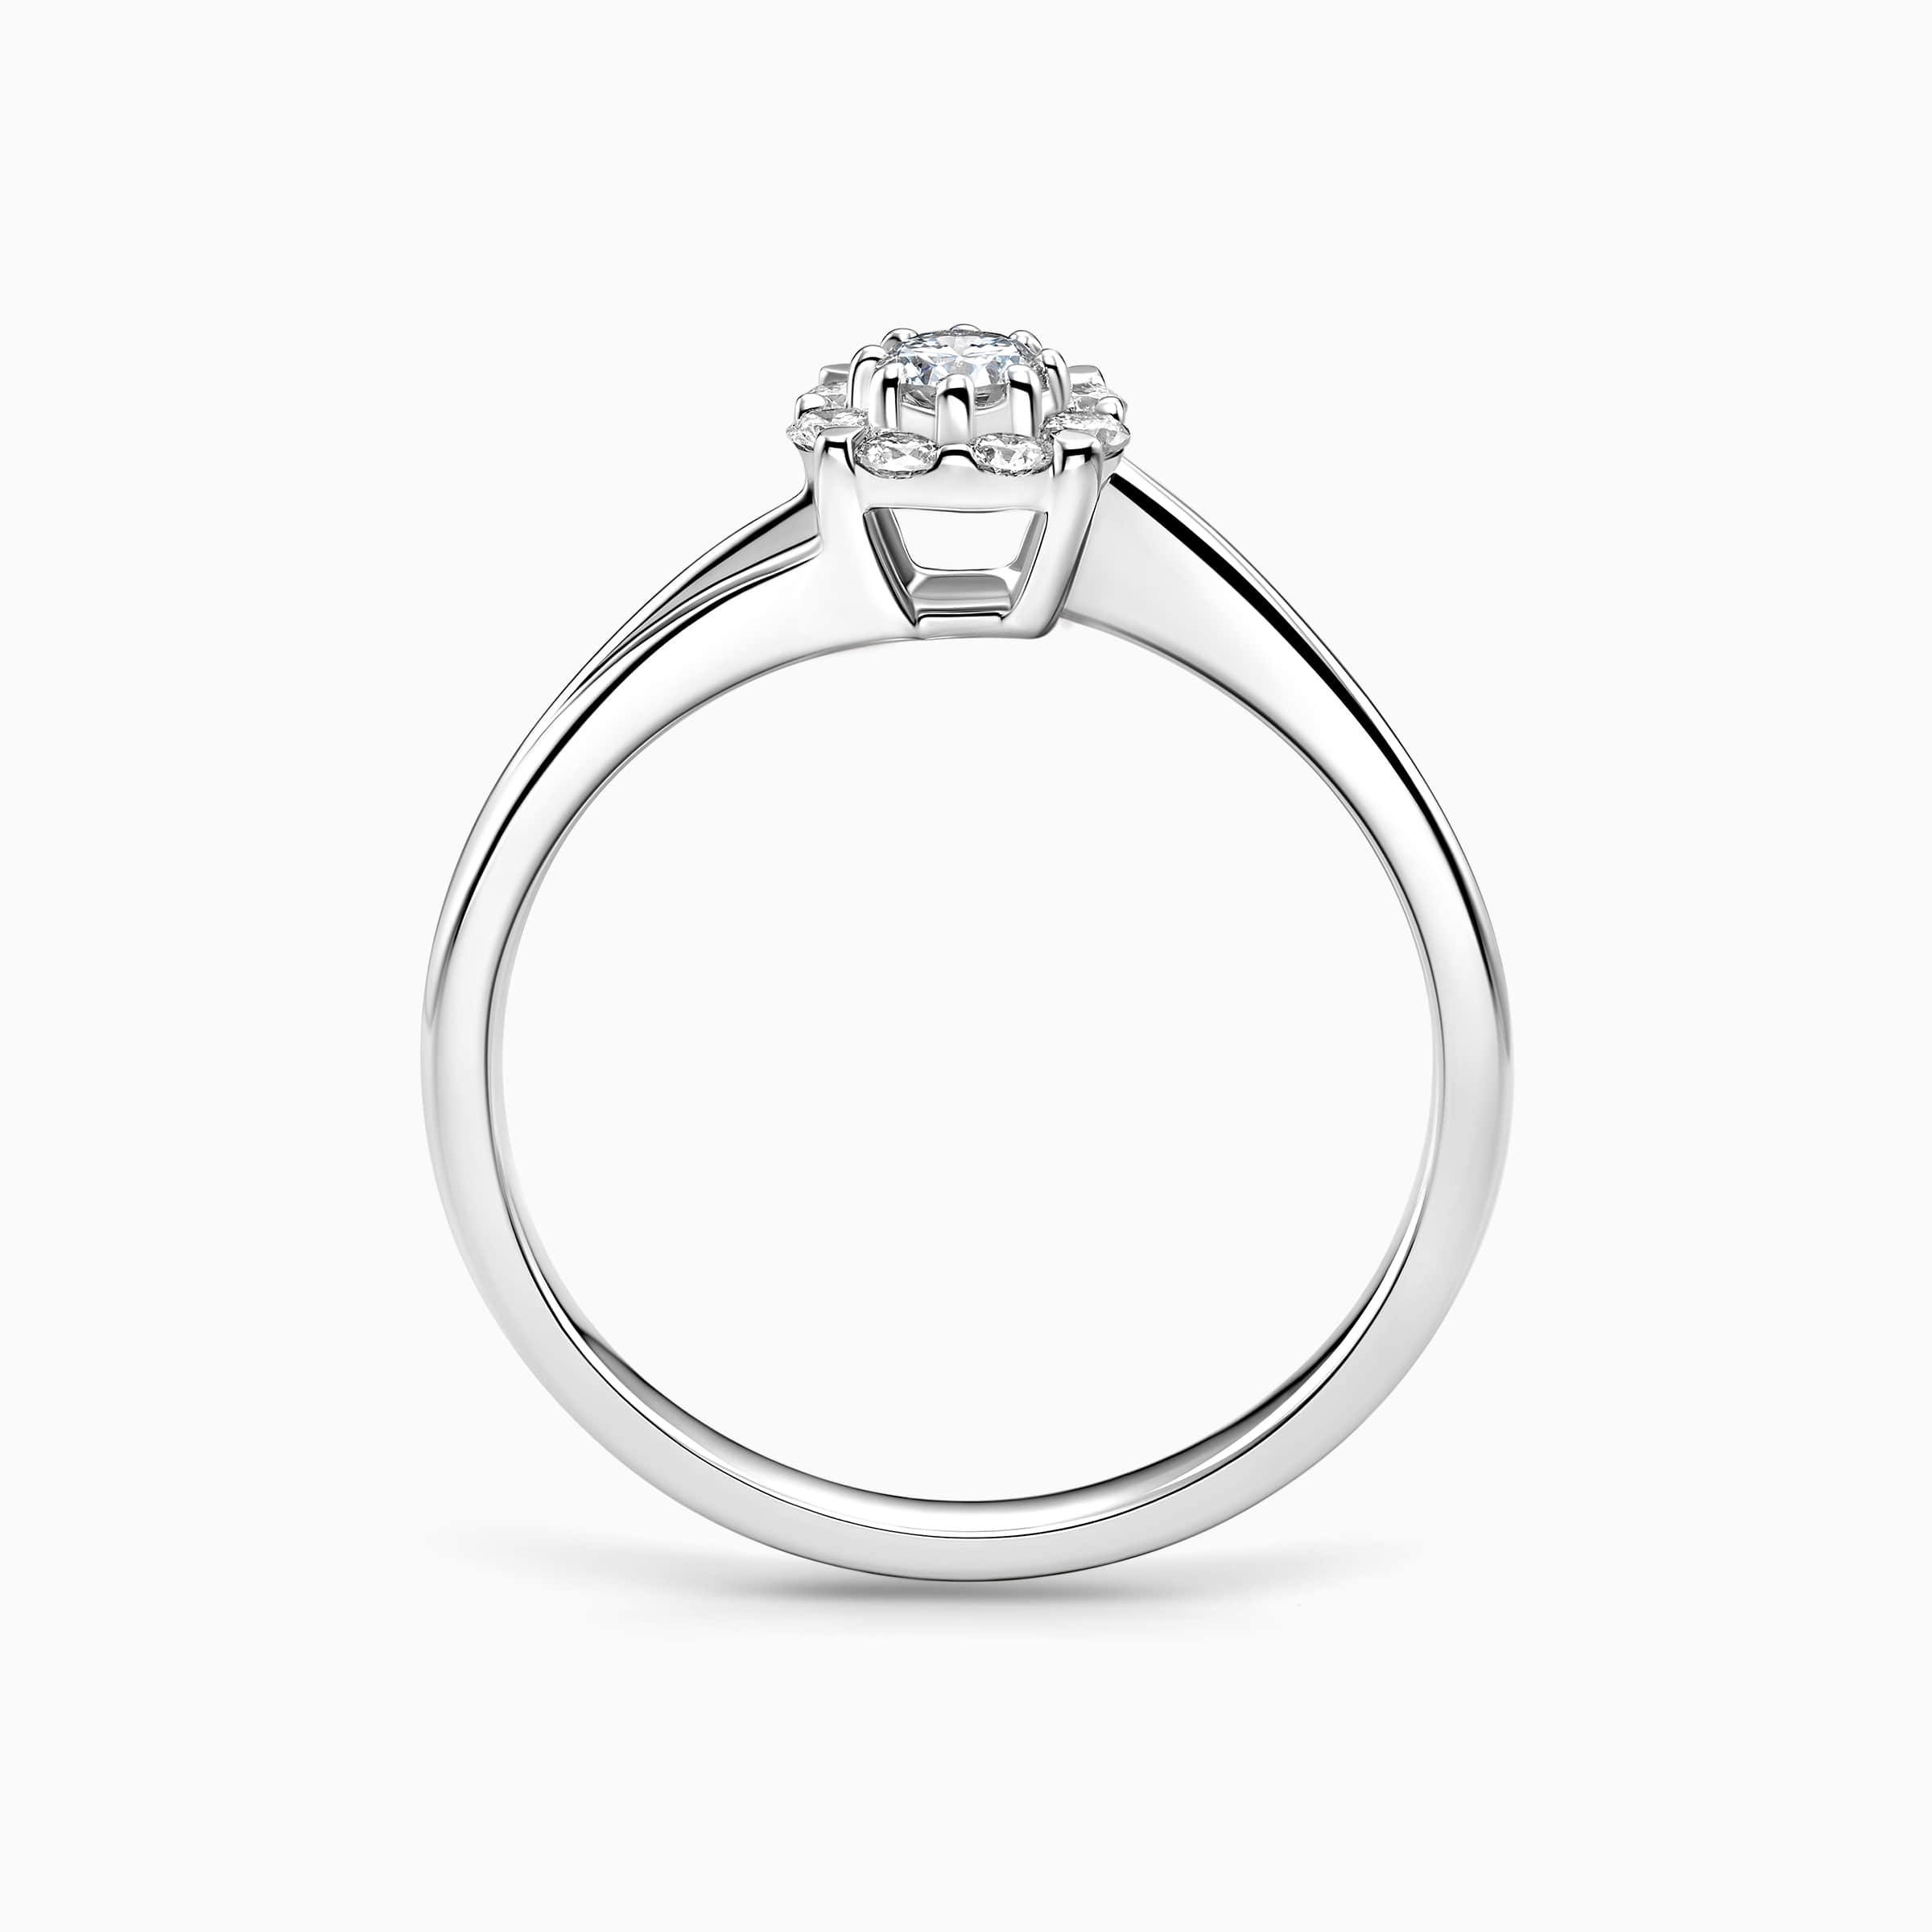 Darry Ring unique halo promise ring side view